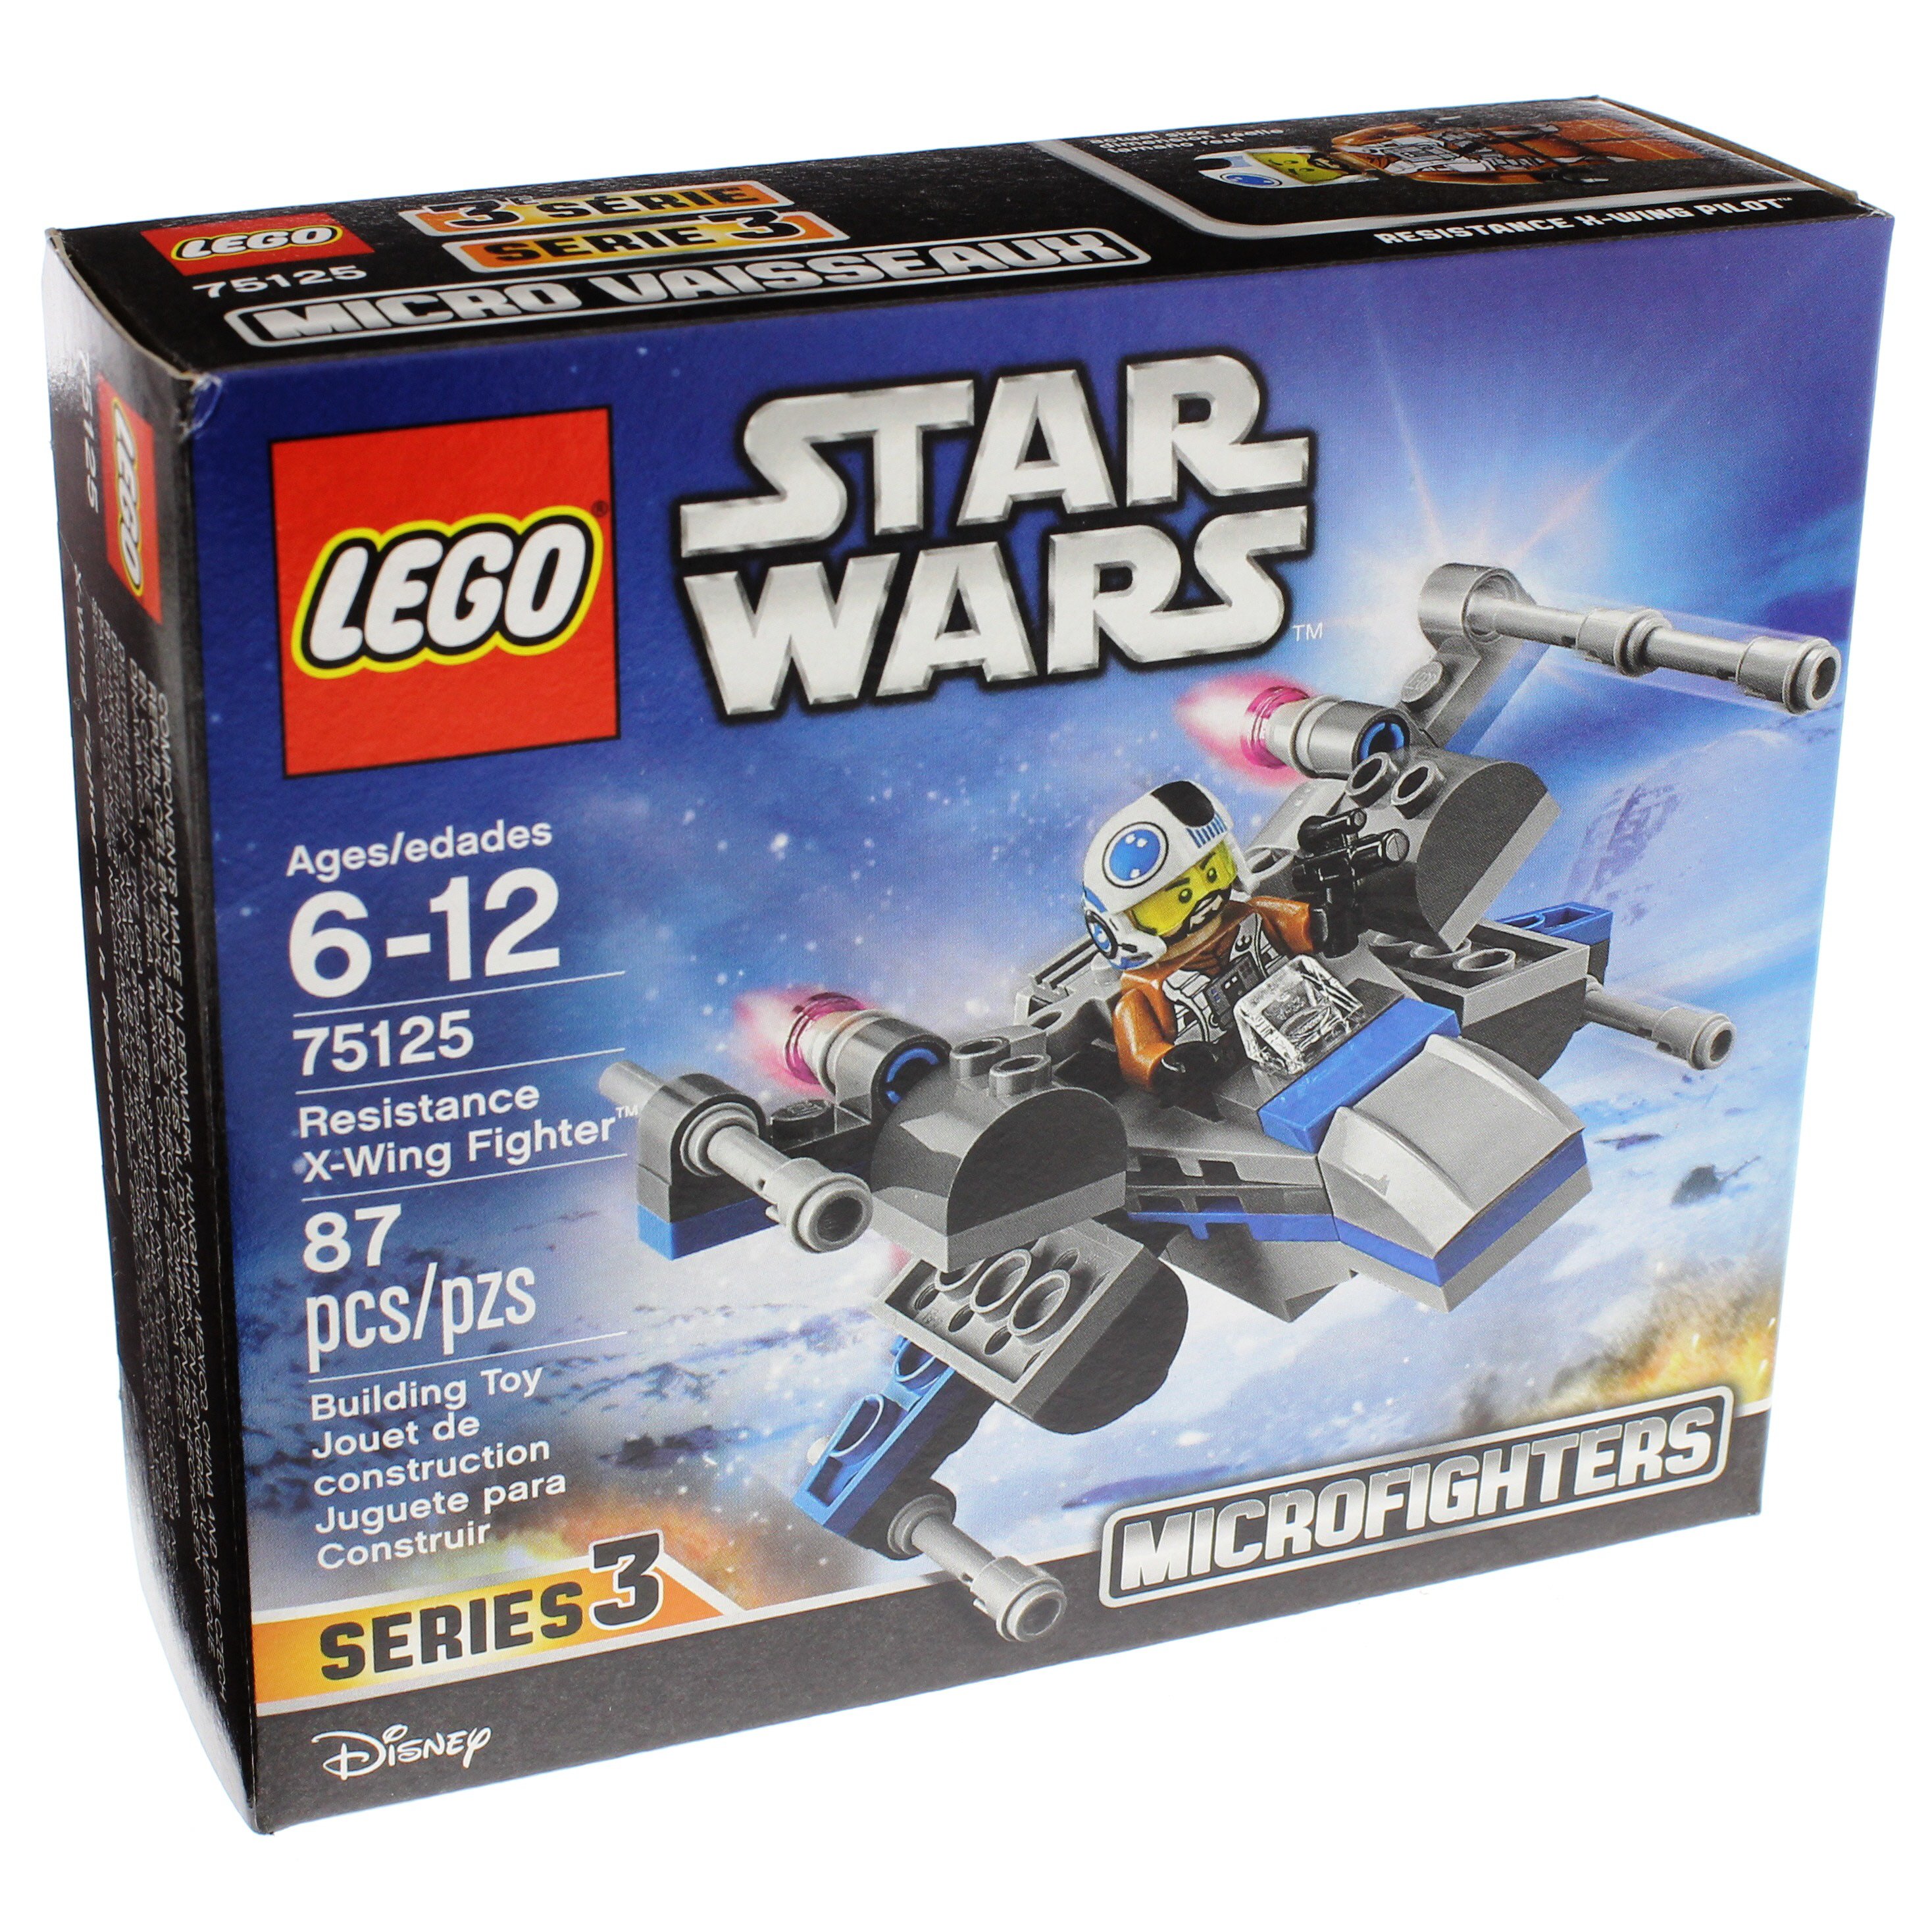 LEGO Wars Resistance X-Wing Fighter Microfighter Shop at H-E-B